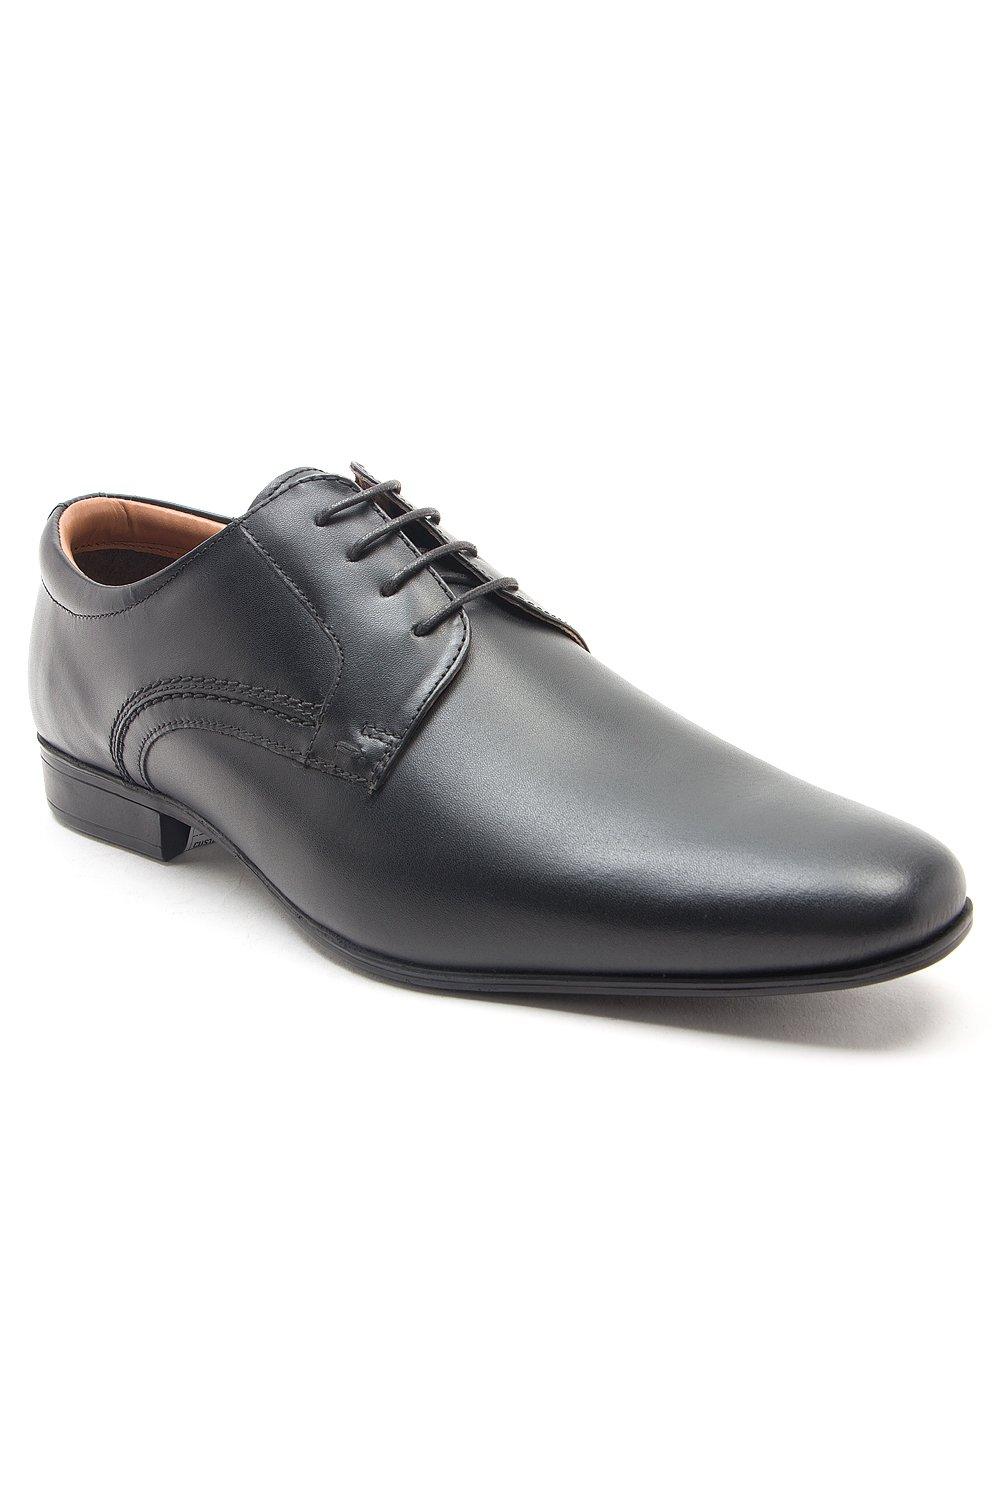 Shoes | 'Ormond' Derby Shoes Formal Stylish and Comforable | Thomas Crick